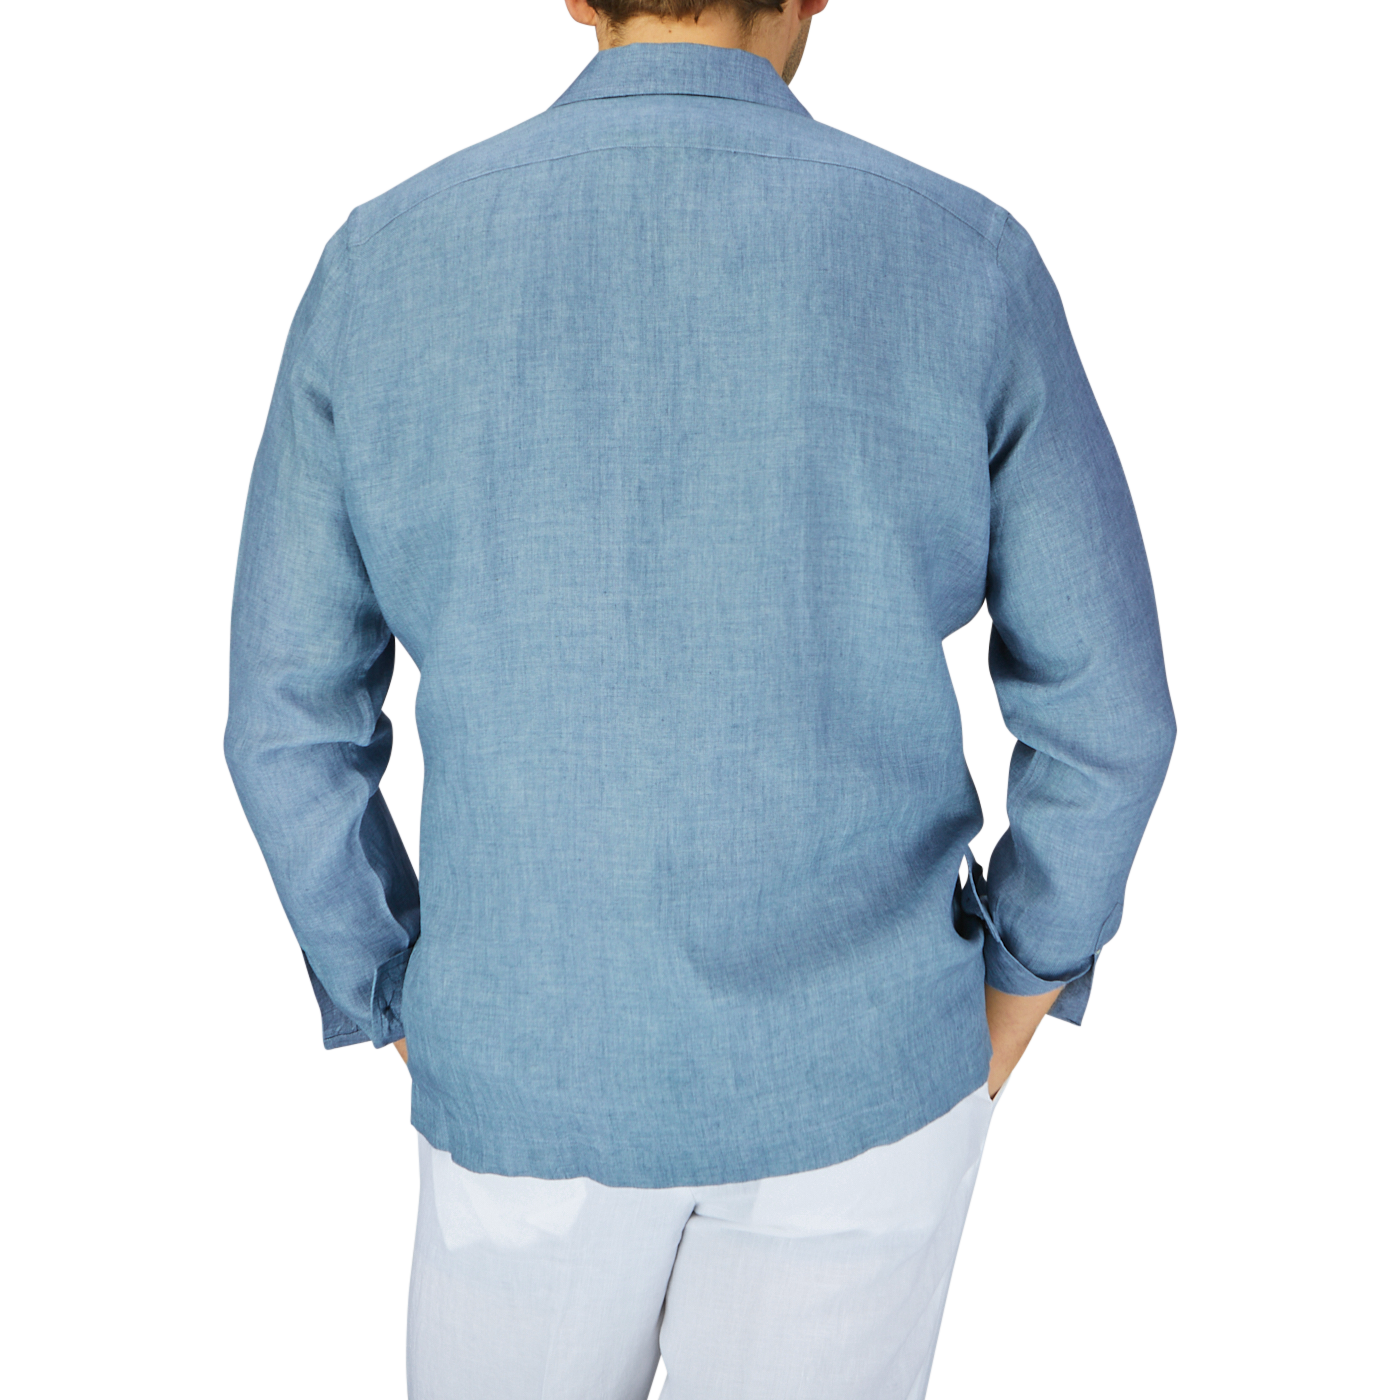 Rear view of a person wearing a Mazzarelli Indigo Blue Organic Linen Four Pocket Overshirt and white pants, standing against a plain light gray background.